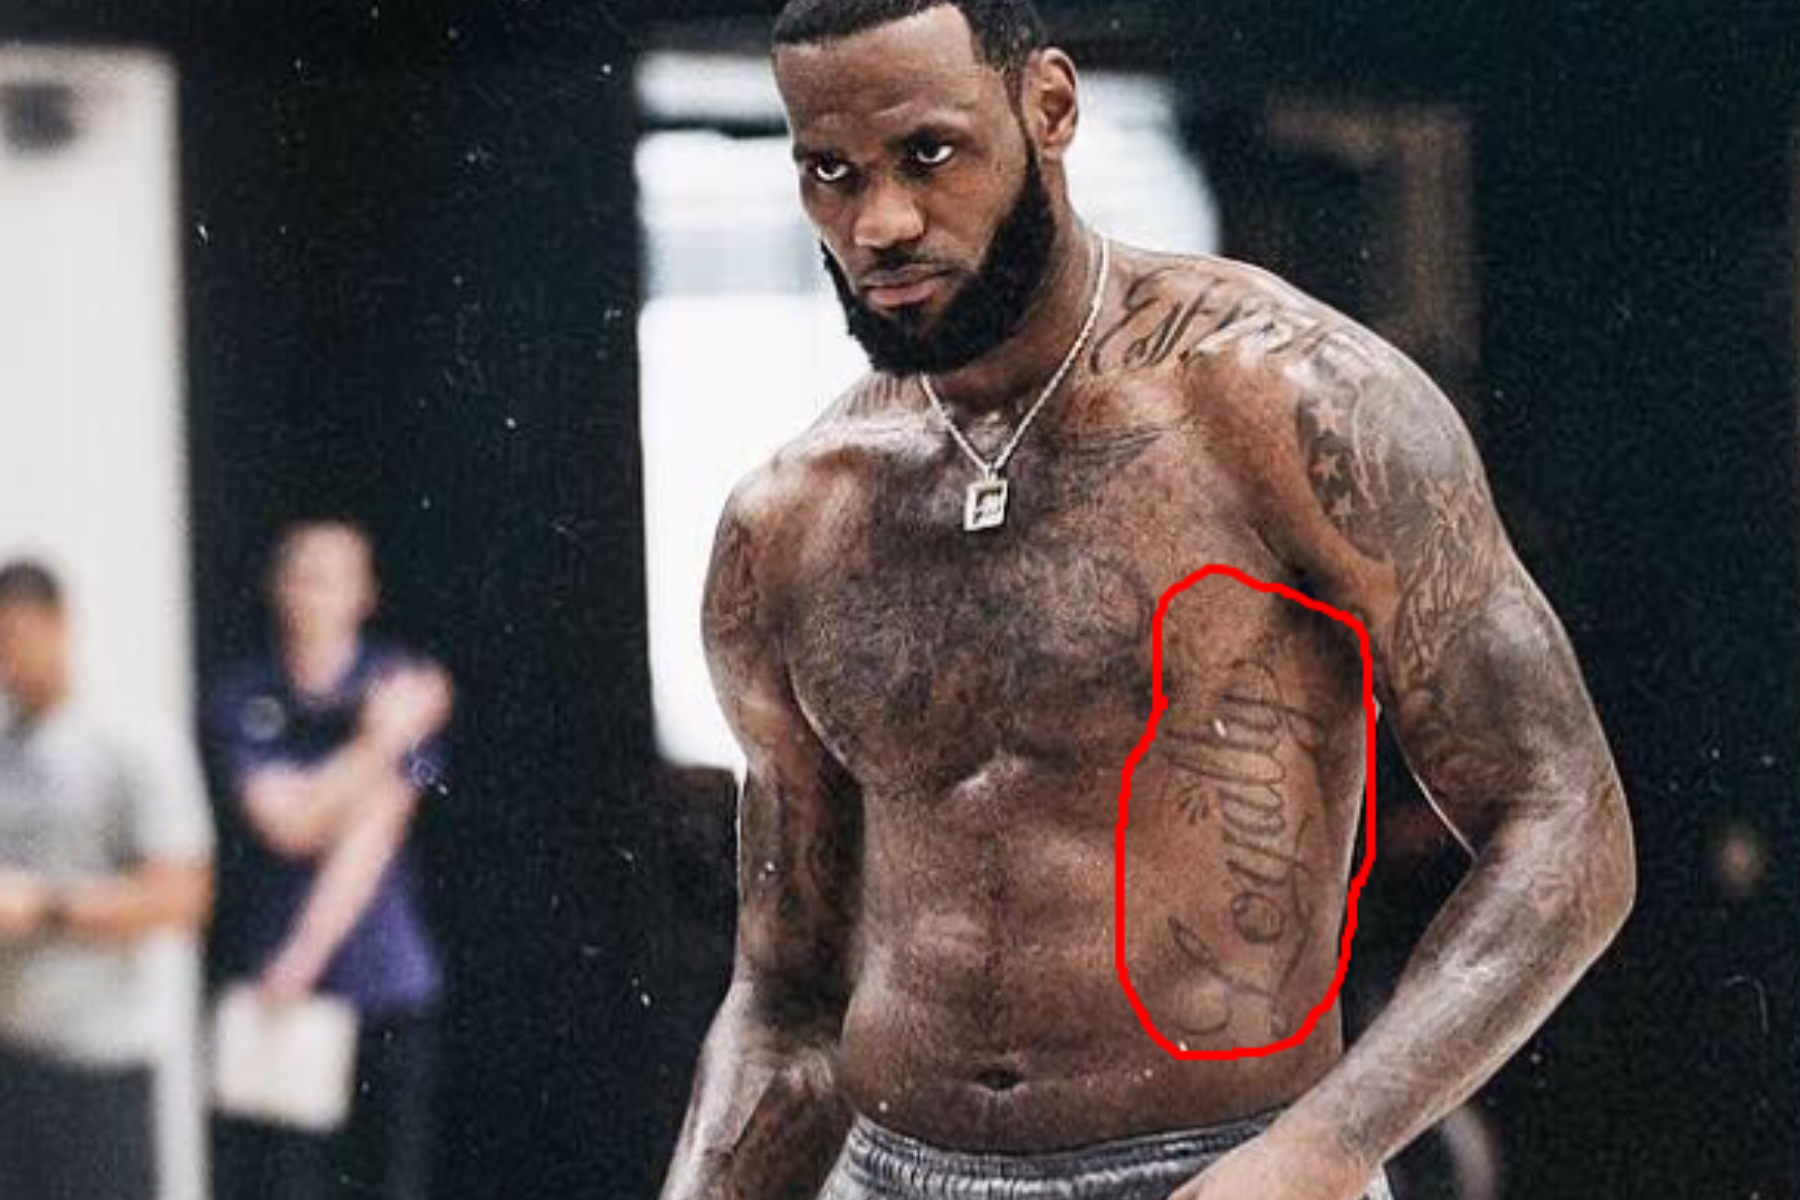 LeBron has a loyalty tattoo on the left side of his stomach